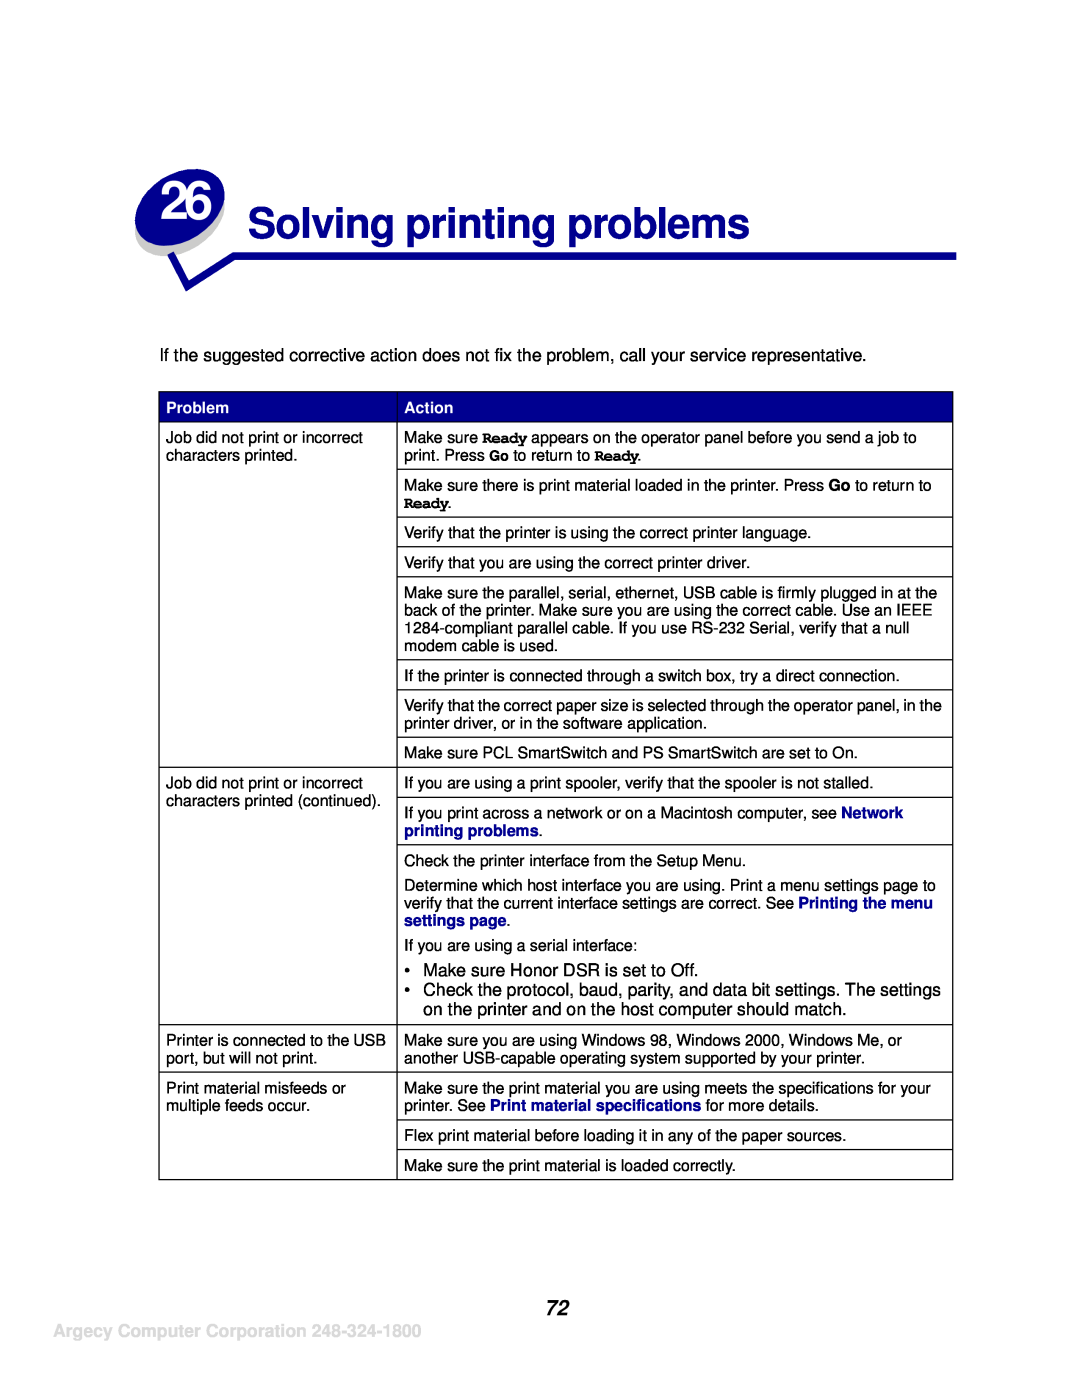 IBM 1125, 1120 manual Solving printing problems, Argecy Computer Corporation, Ready, settings page 